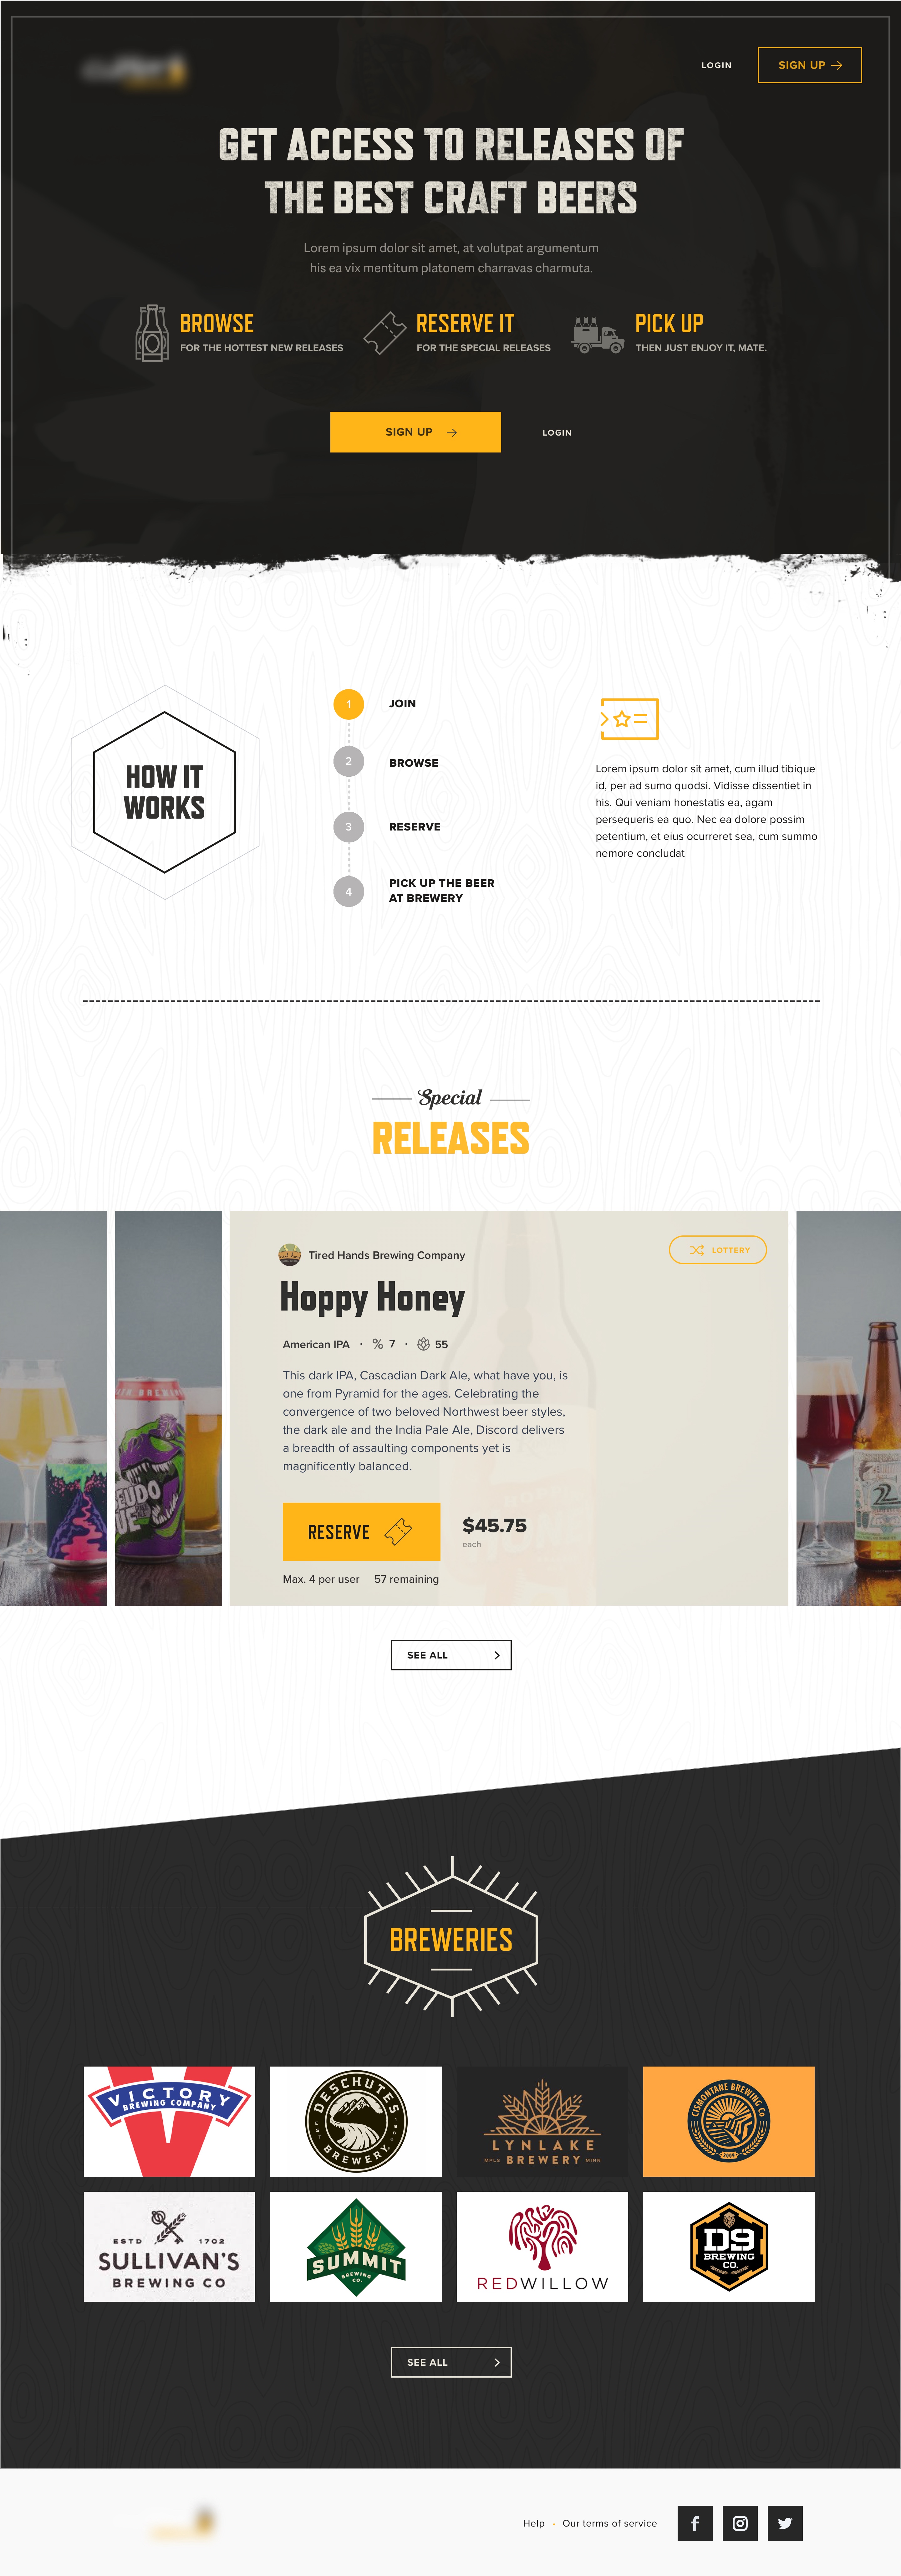 clean and simple website design idea for clean and simple website design idea for beer company